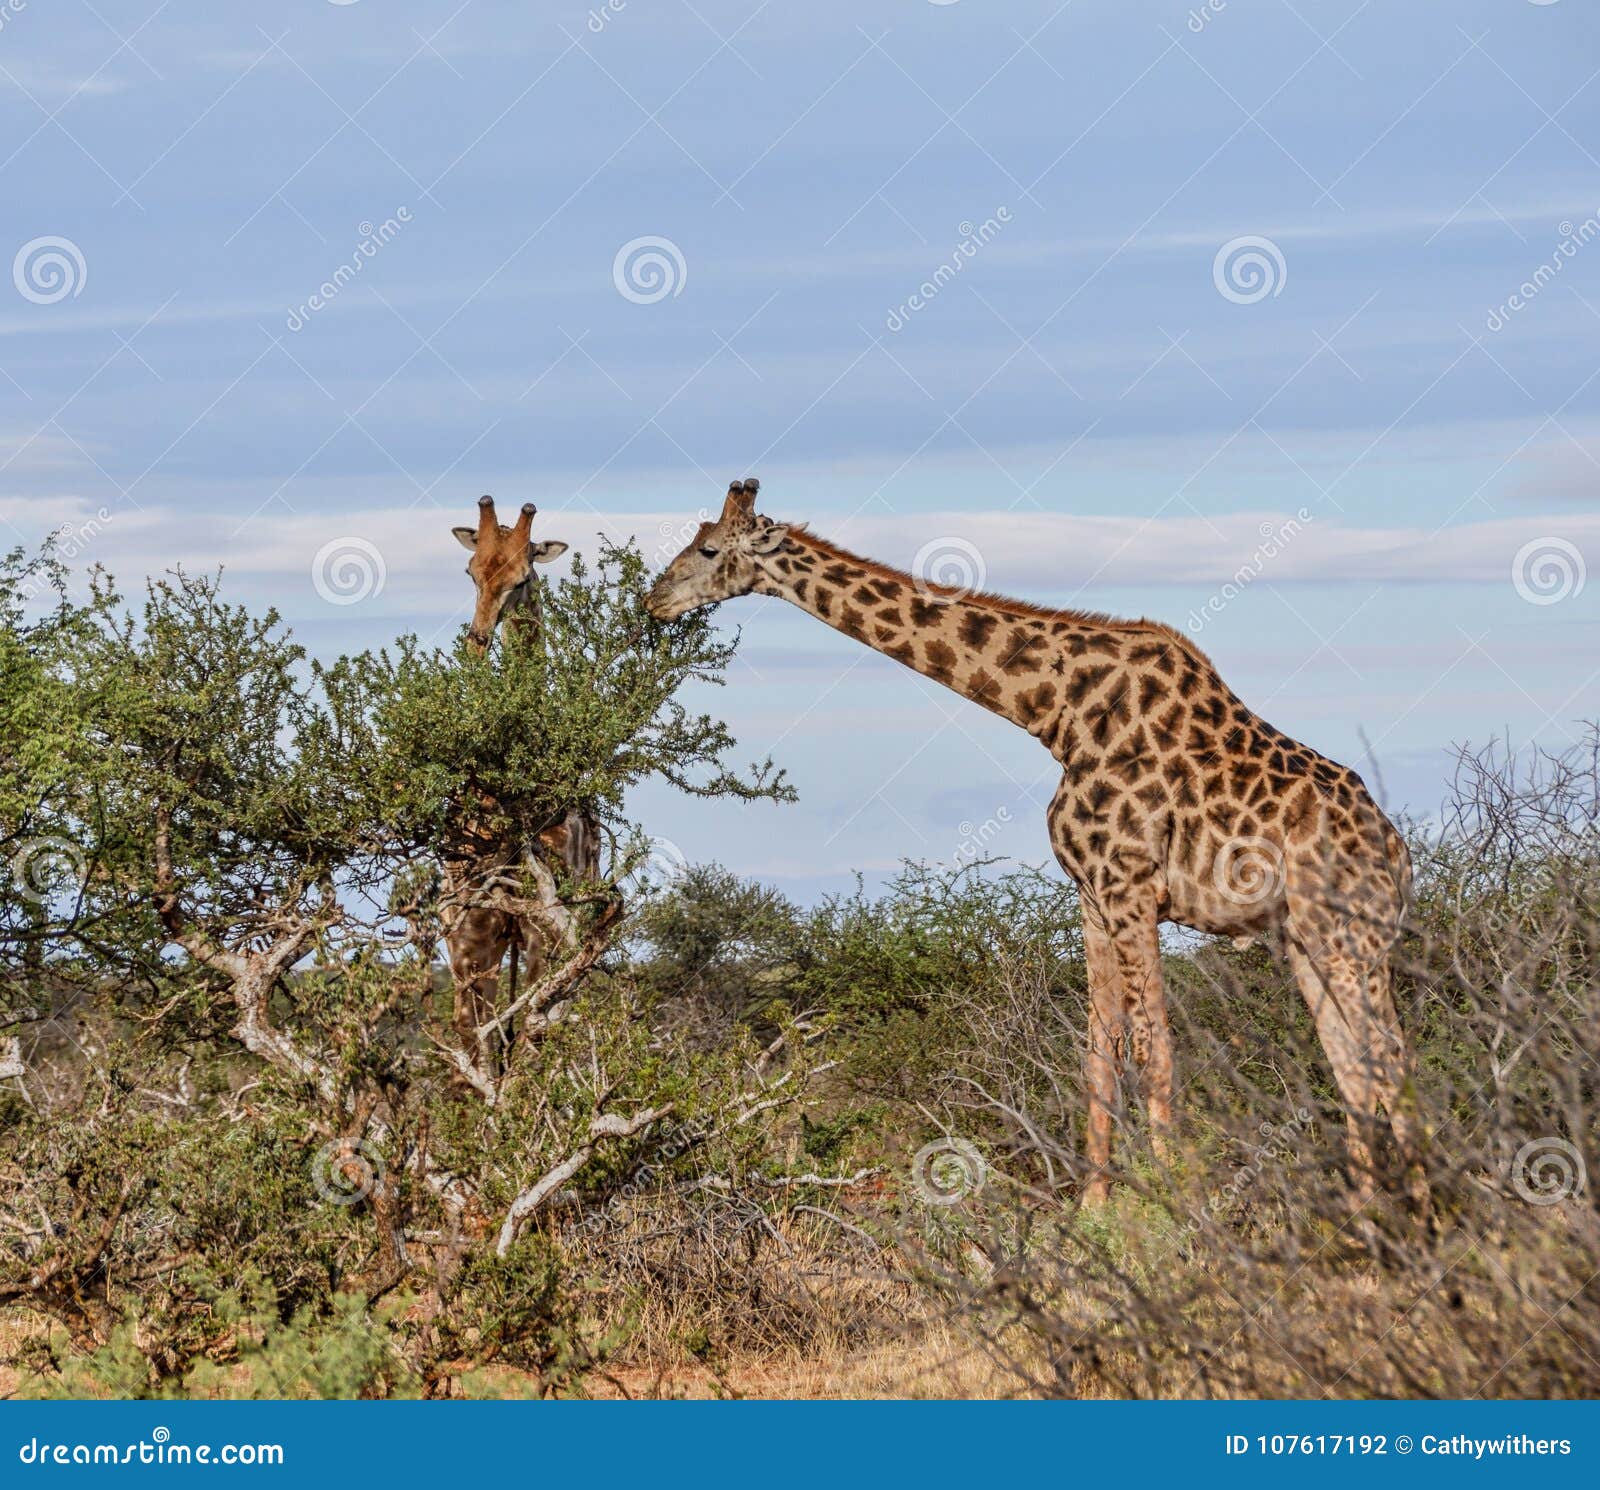 Top 97+ Images what eats a giraffe in the savanna Updated